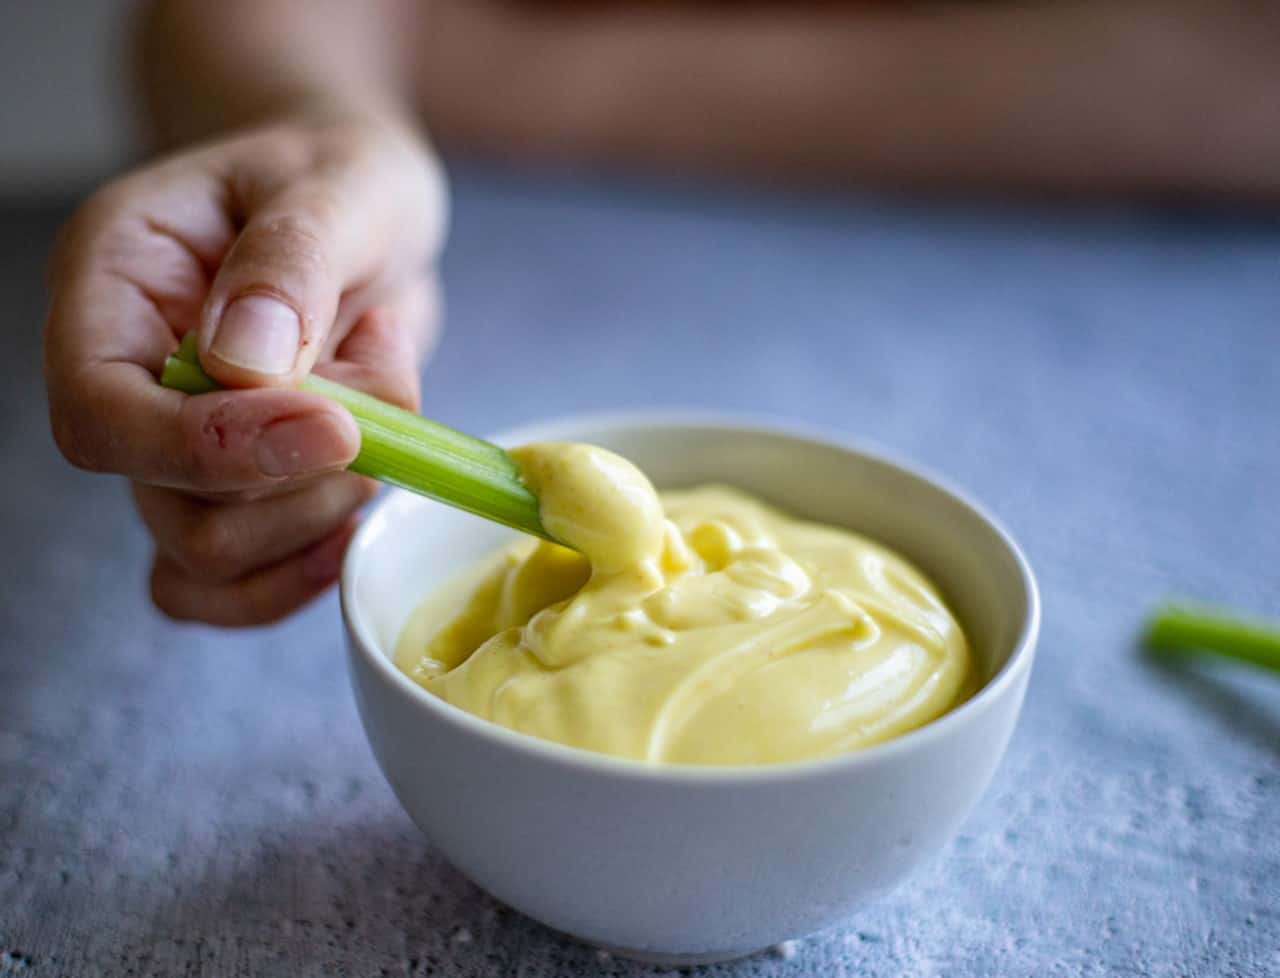 How to Make Easy Vegan Mayo in 1 Minute